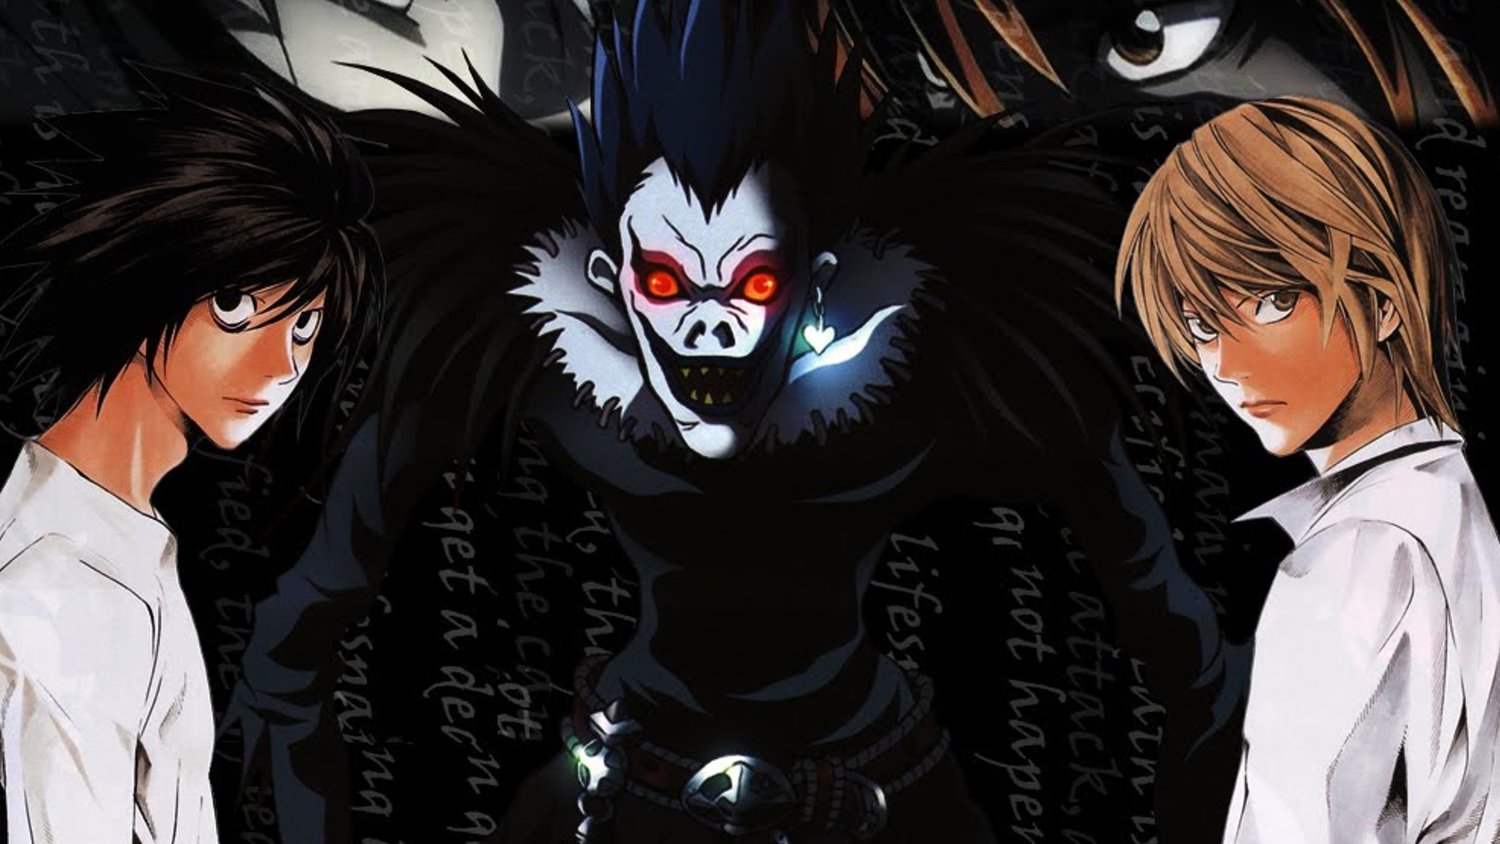 DEATH NOTE Director Says The Film's Got Swearing, Nudity, and a 